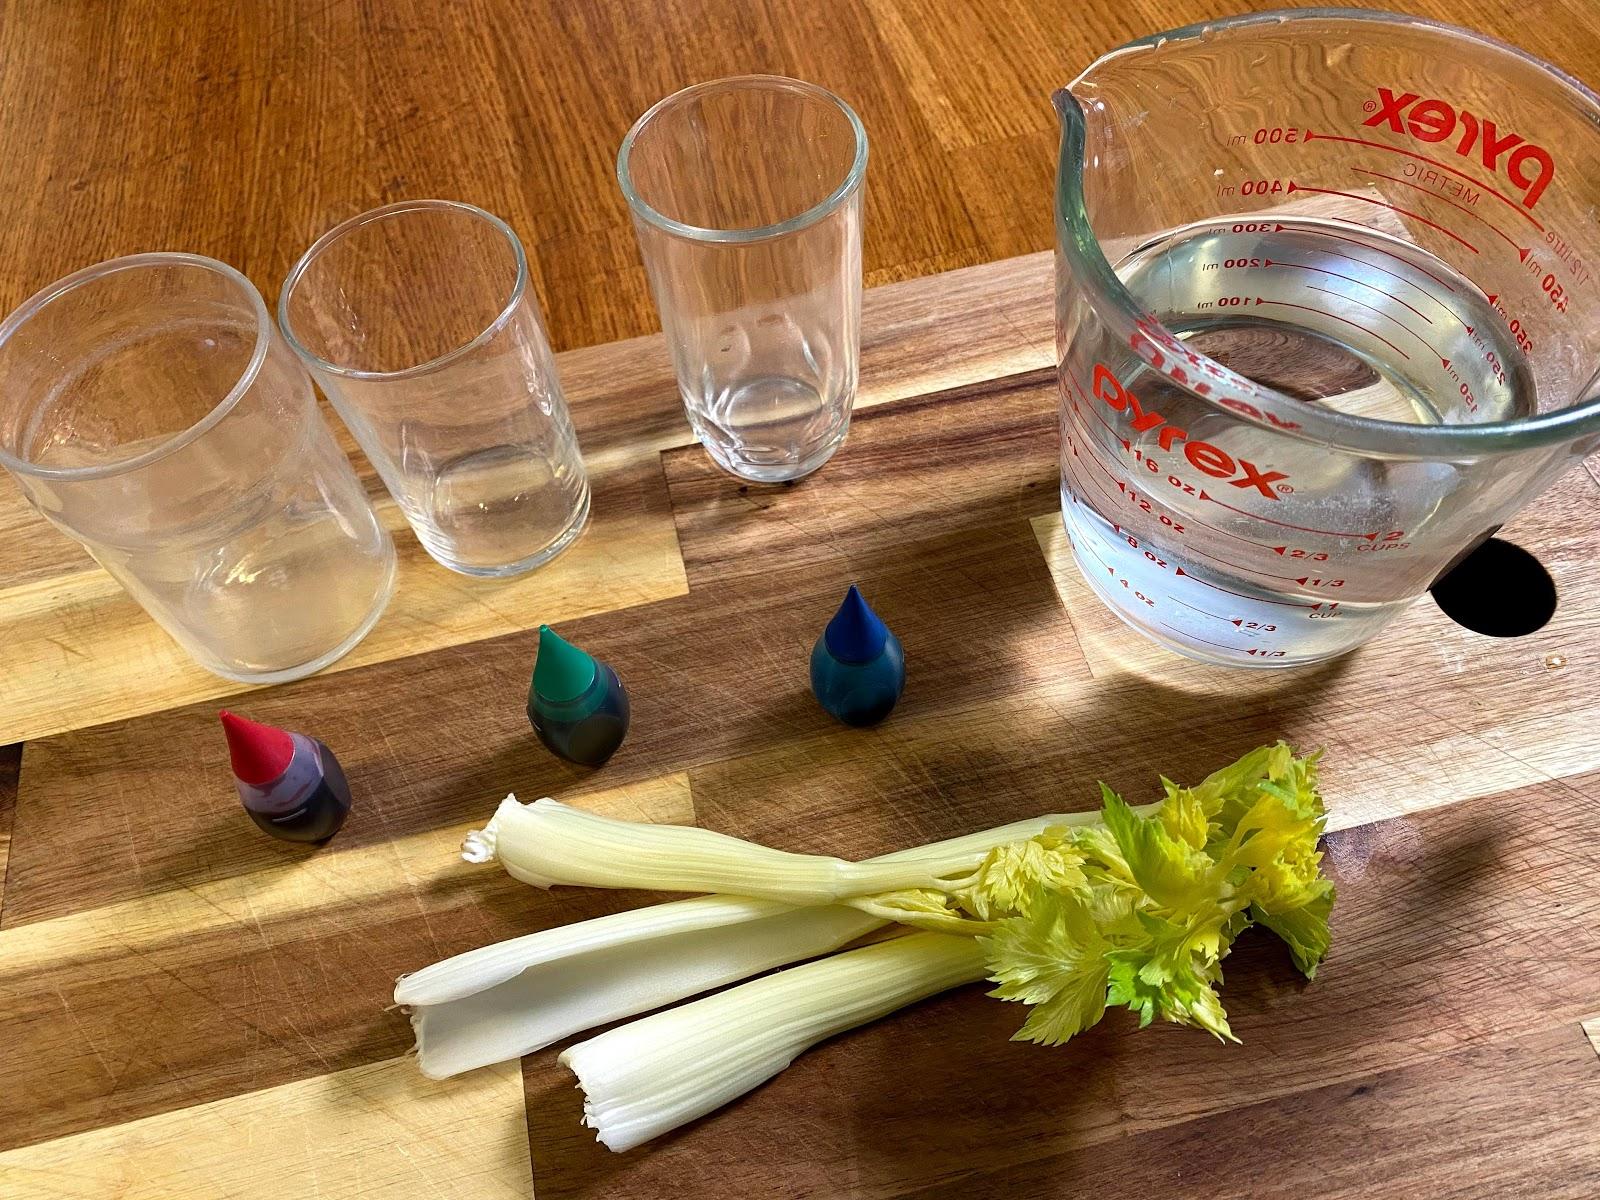 On a cutting board are arranged 3 glasses, a measuring cup of water, 3 stalks of celery, and red, green, and blue food coloring. 